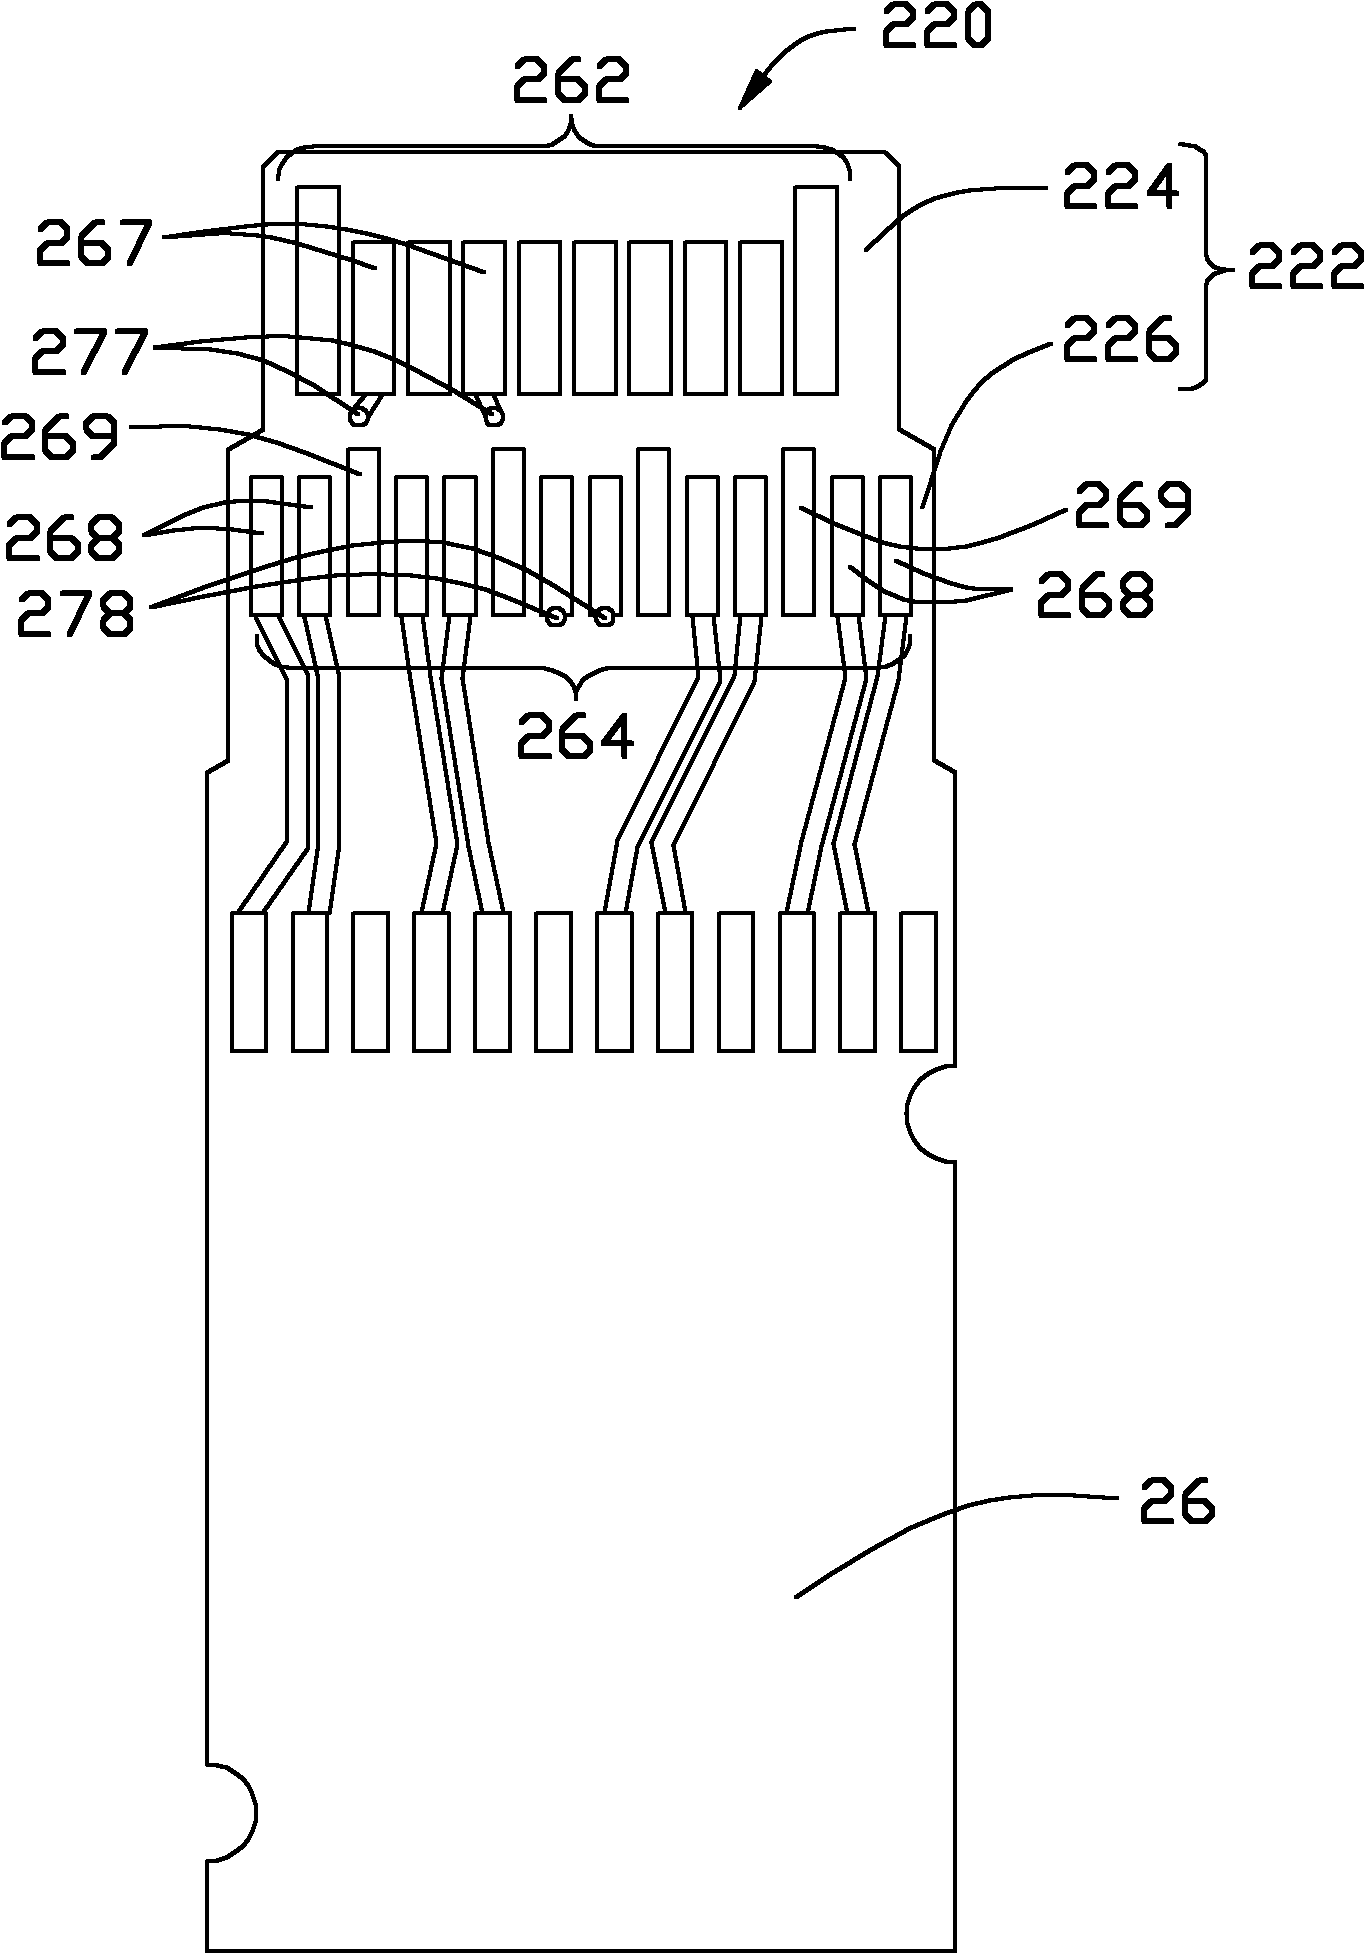 Connector component